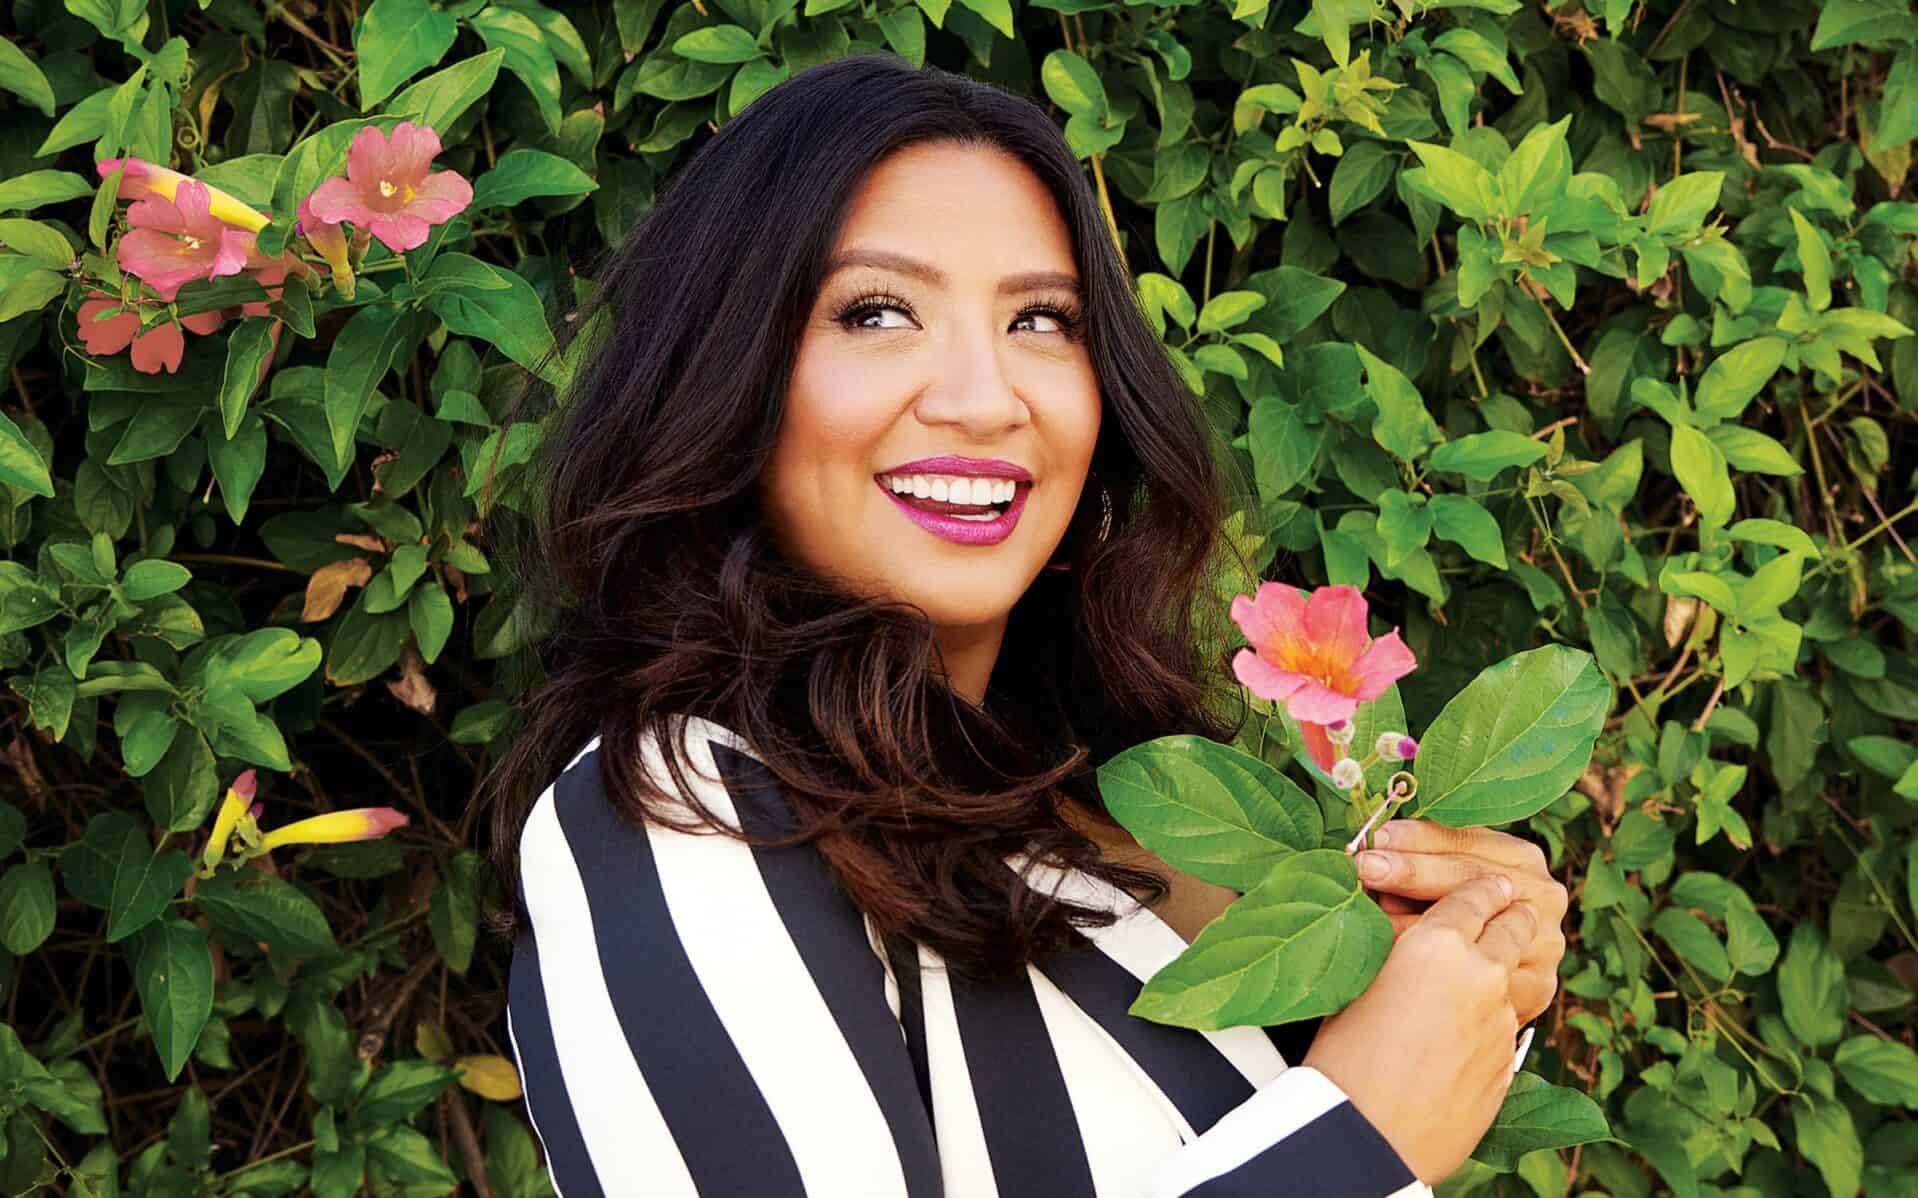 Who is Cristela Alonzo dating?